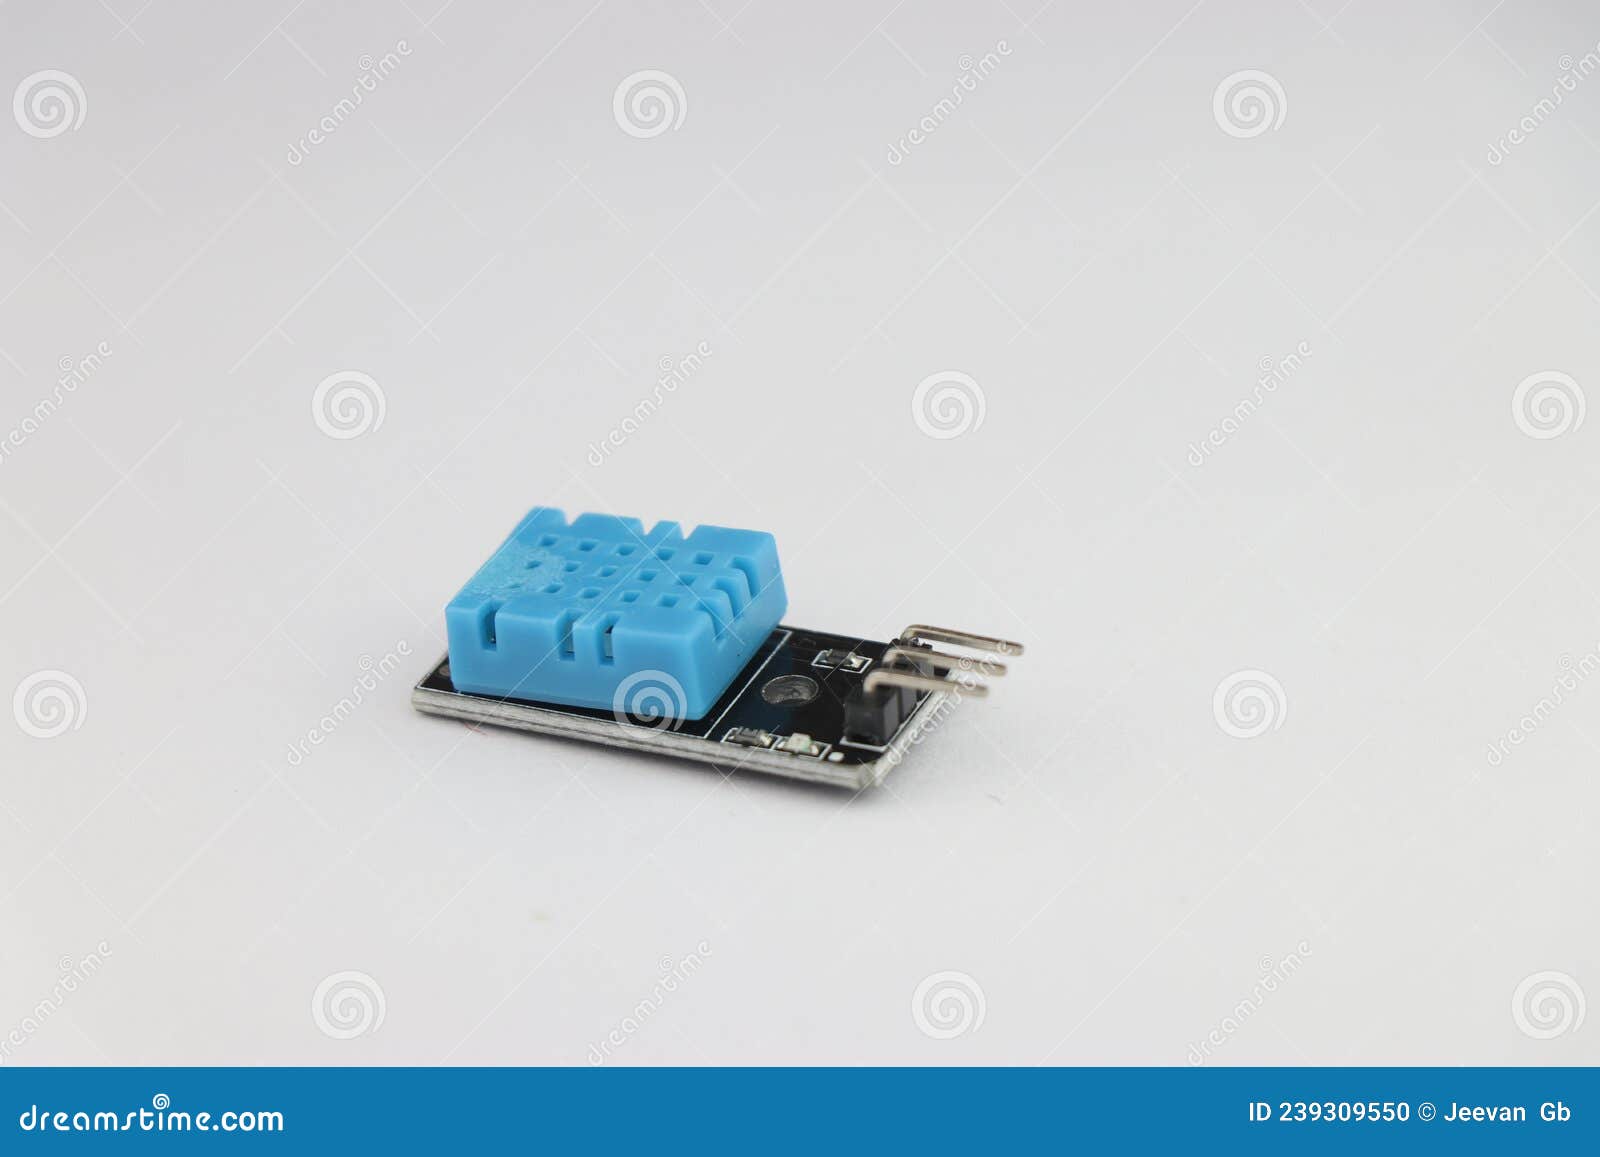 dht11 temperature and humidity sensor module  on white background with side view